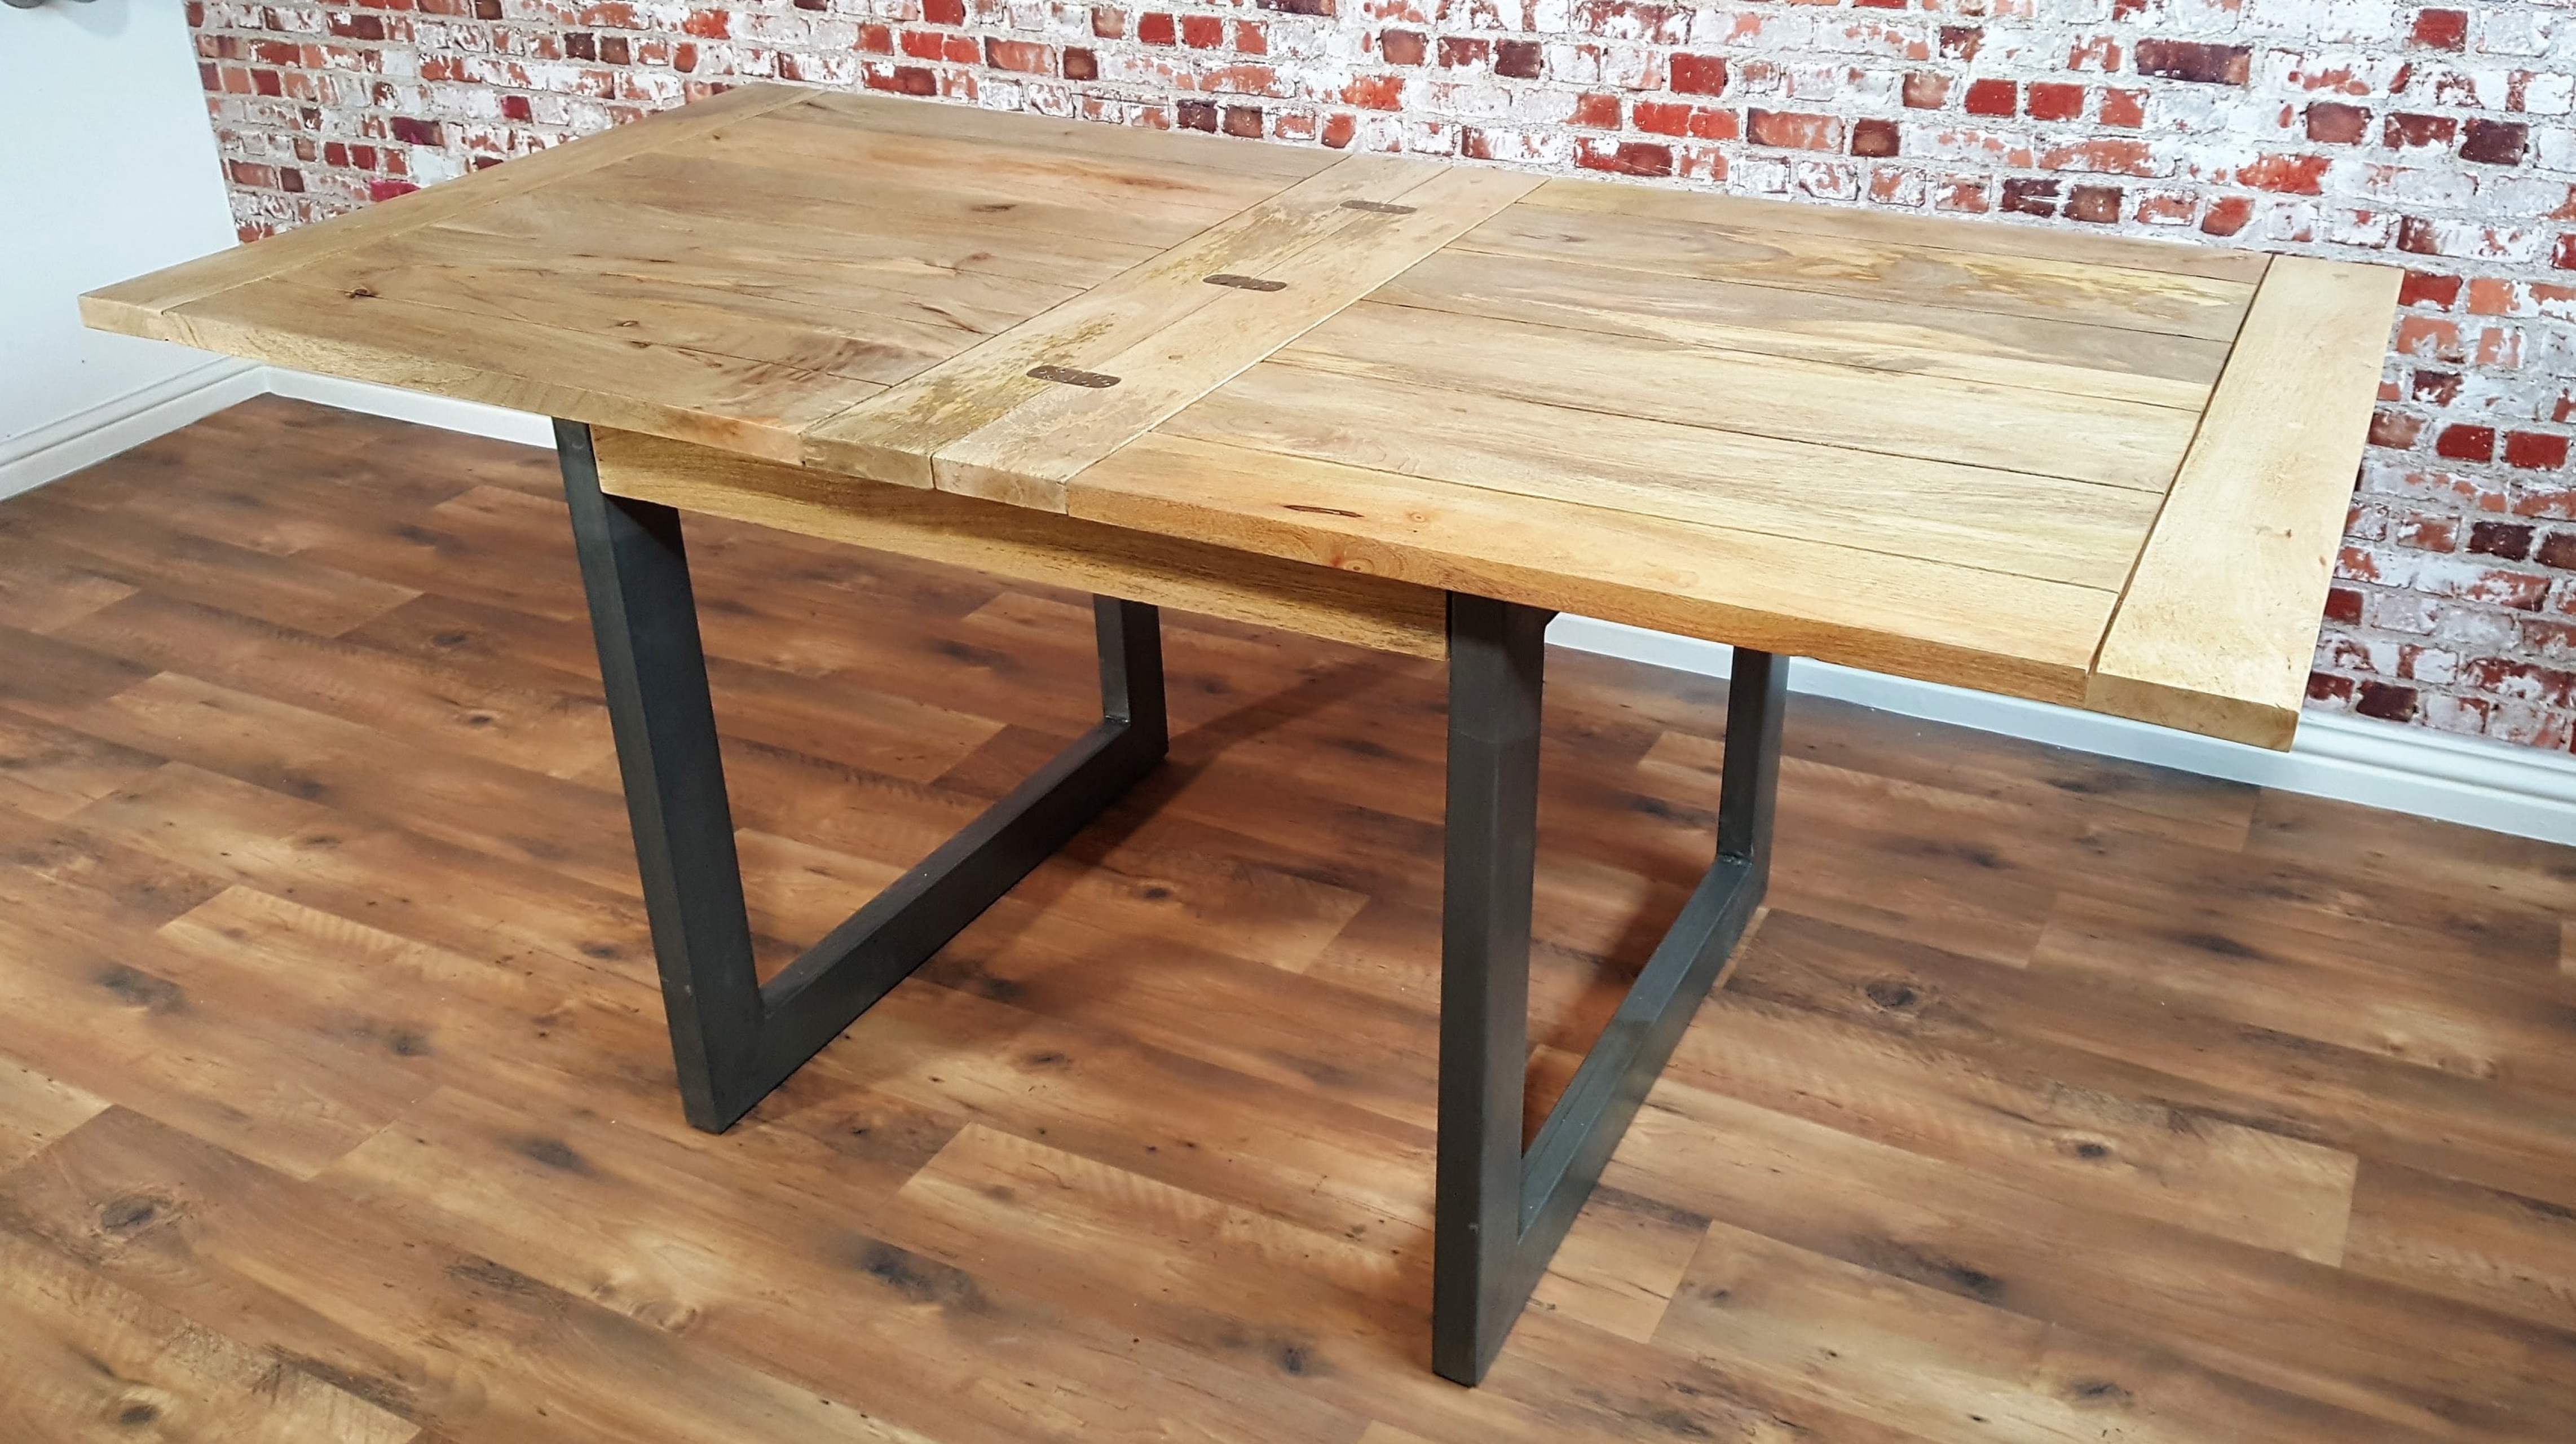 Extending Rustic Folding Dining Table Drop Leaf Space 